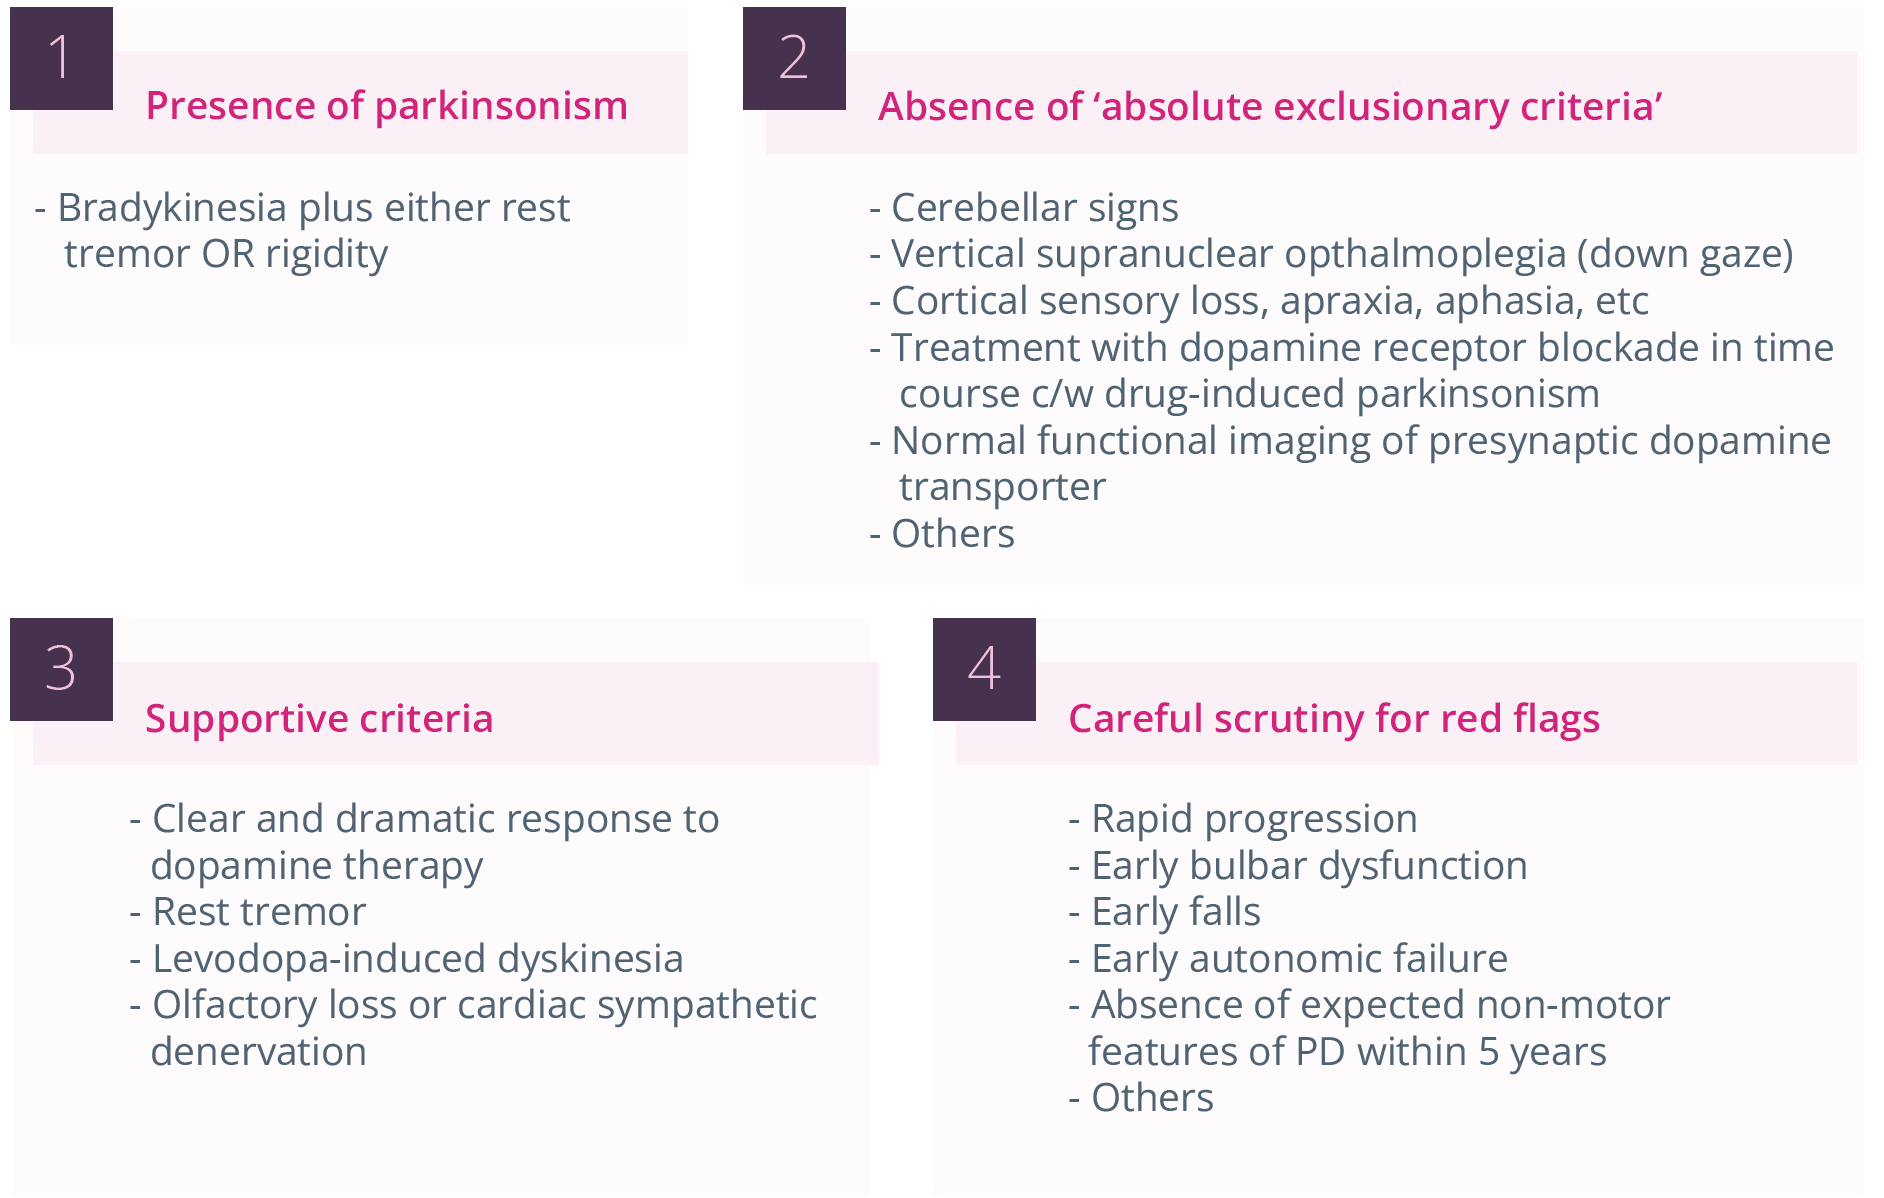 challenges in the diagnosis of PD include presence of parkinsonism, absence of absolute exclusionary criteria, supportive criteria and careful scrutiny for red flags